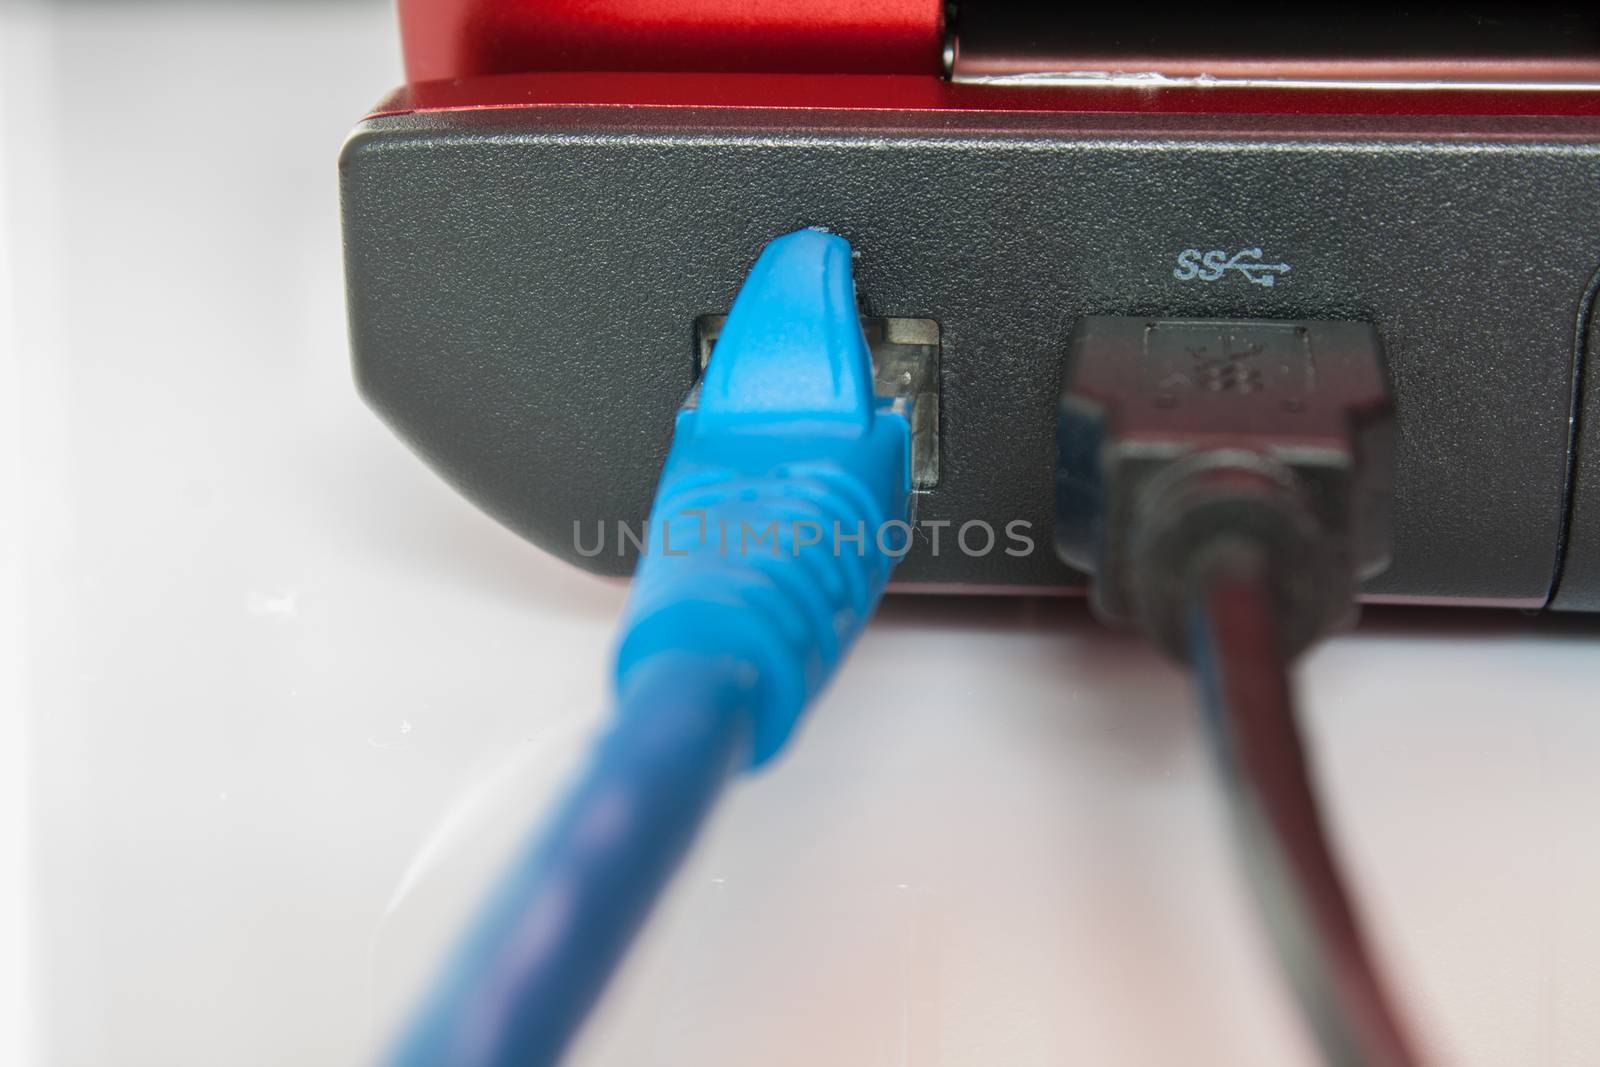 Connected patch cable to laptop, plug with internet cable and la by oodfon